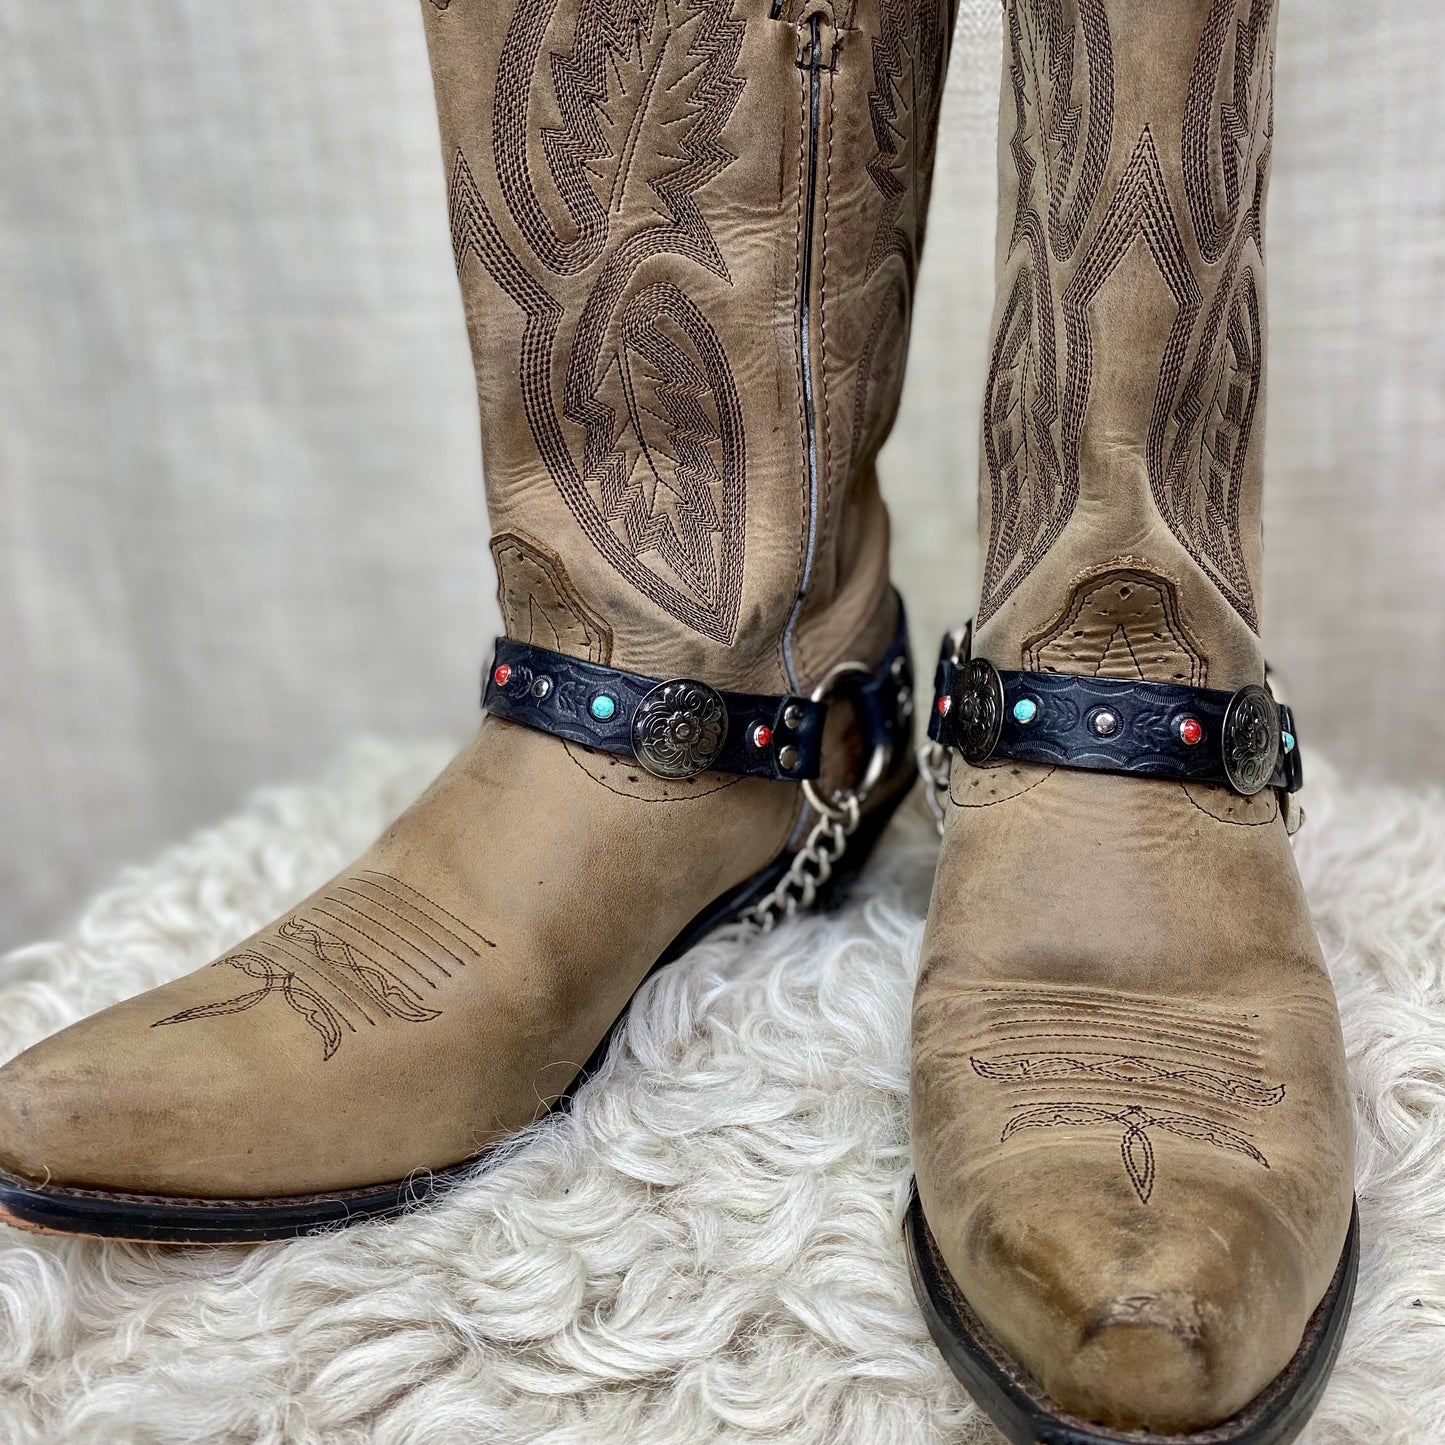 Stamped Boot Straps with Stones